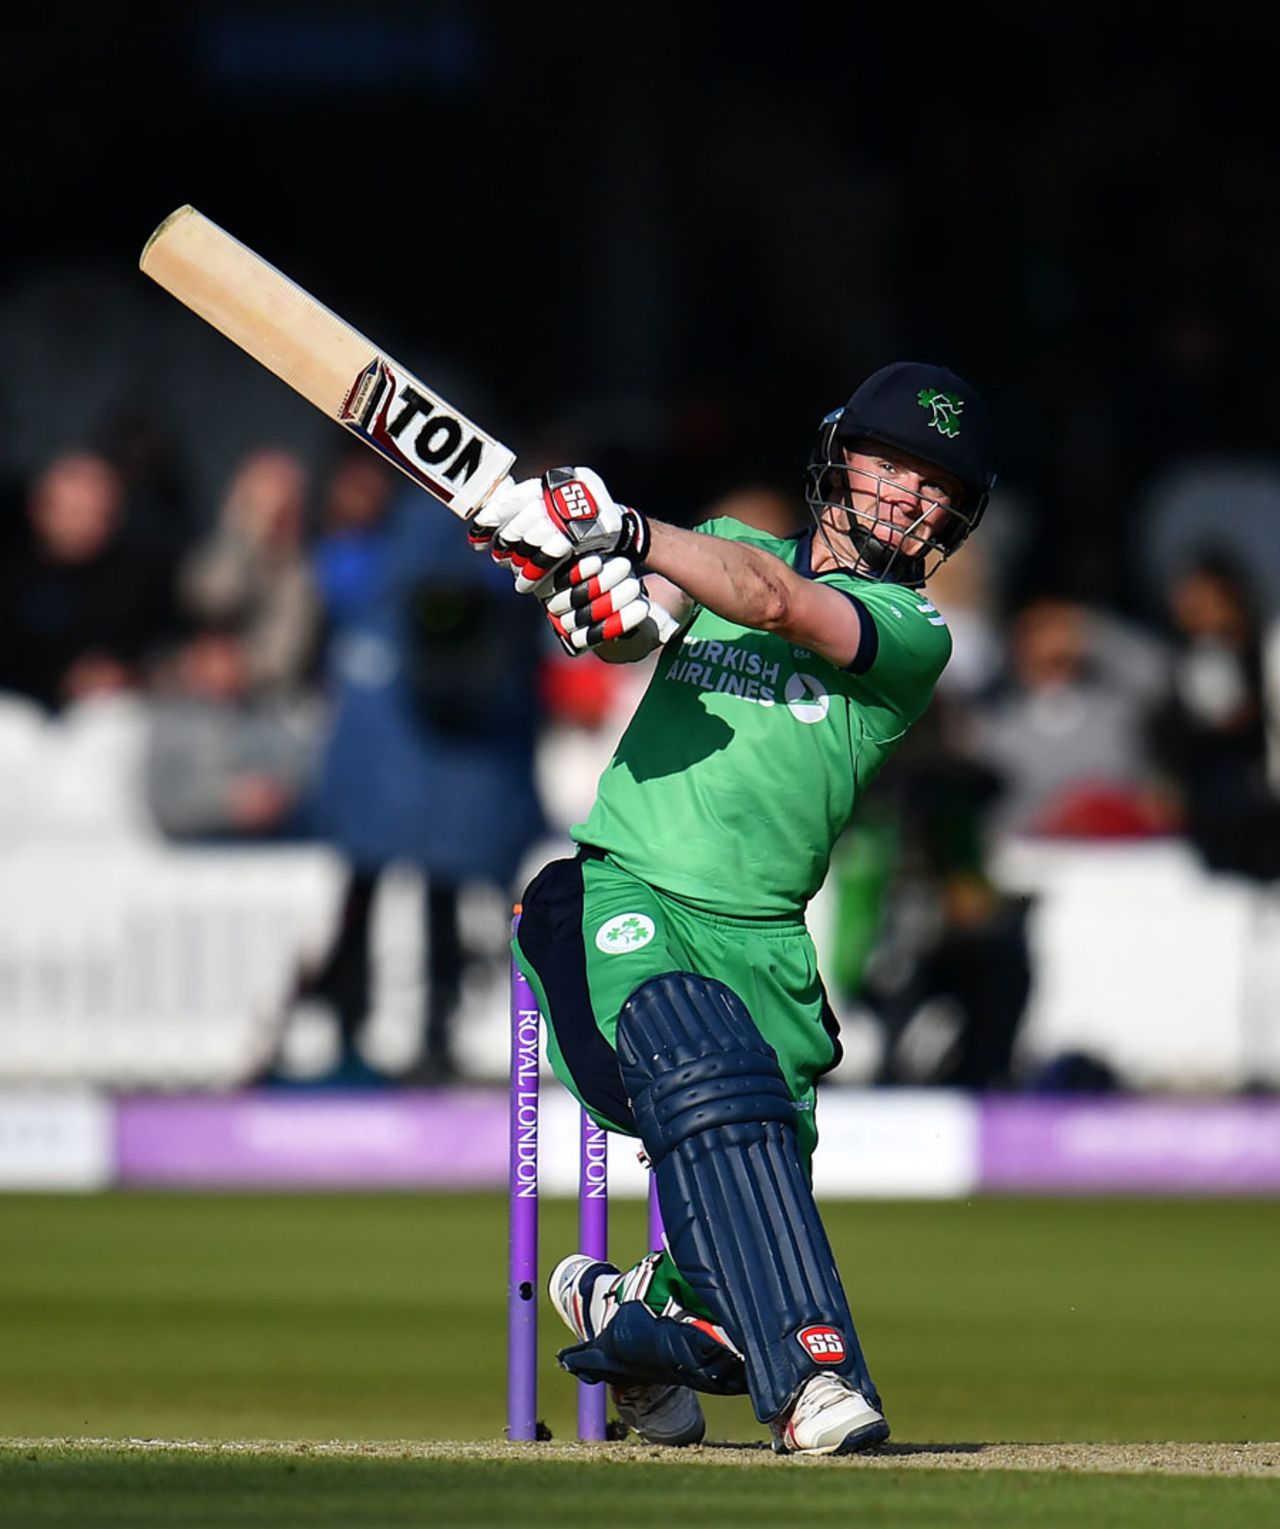 William Porterfield carried Ireland's chase with 82, England v Ireland, 2nd ODI, Lord's, May 7, 2017